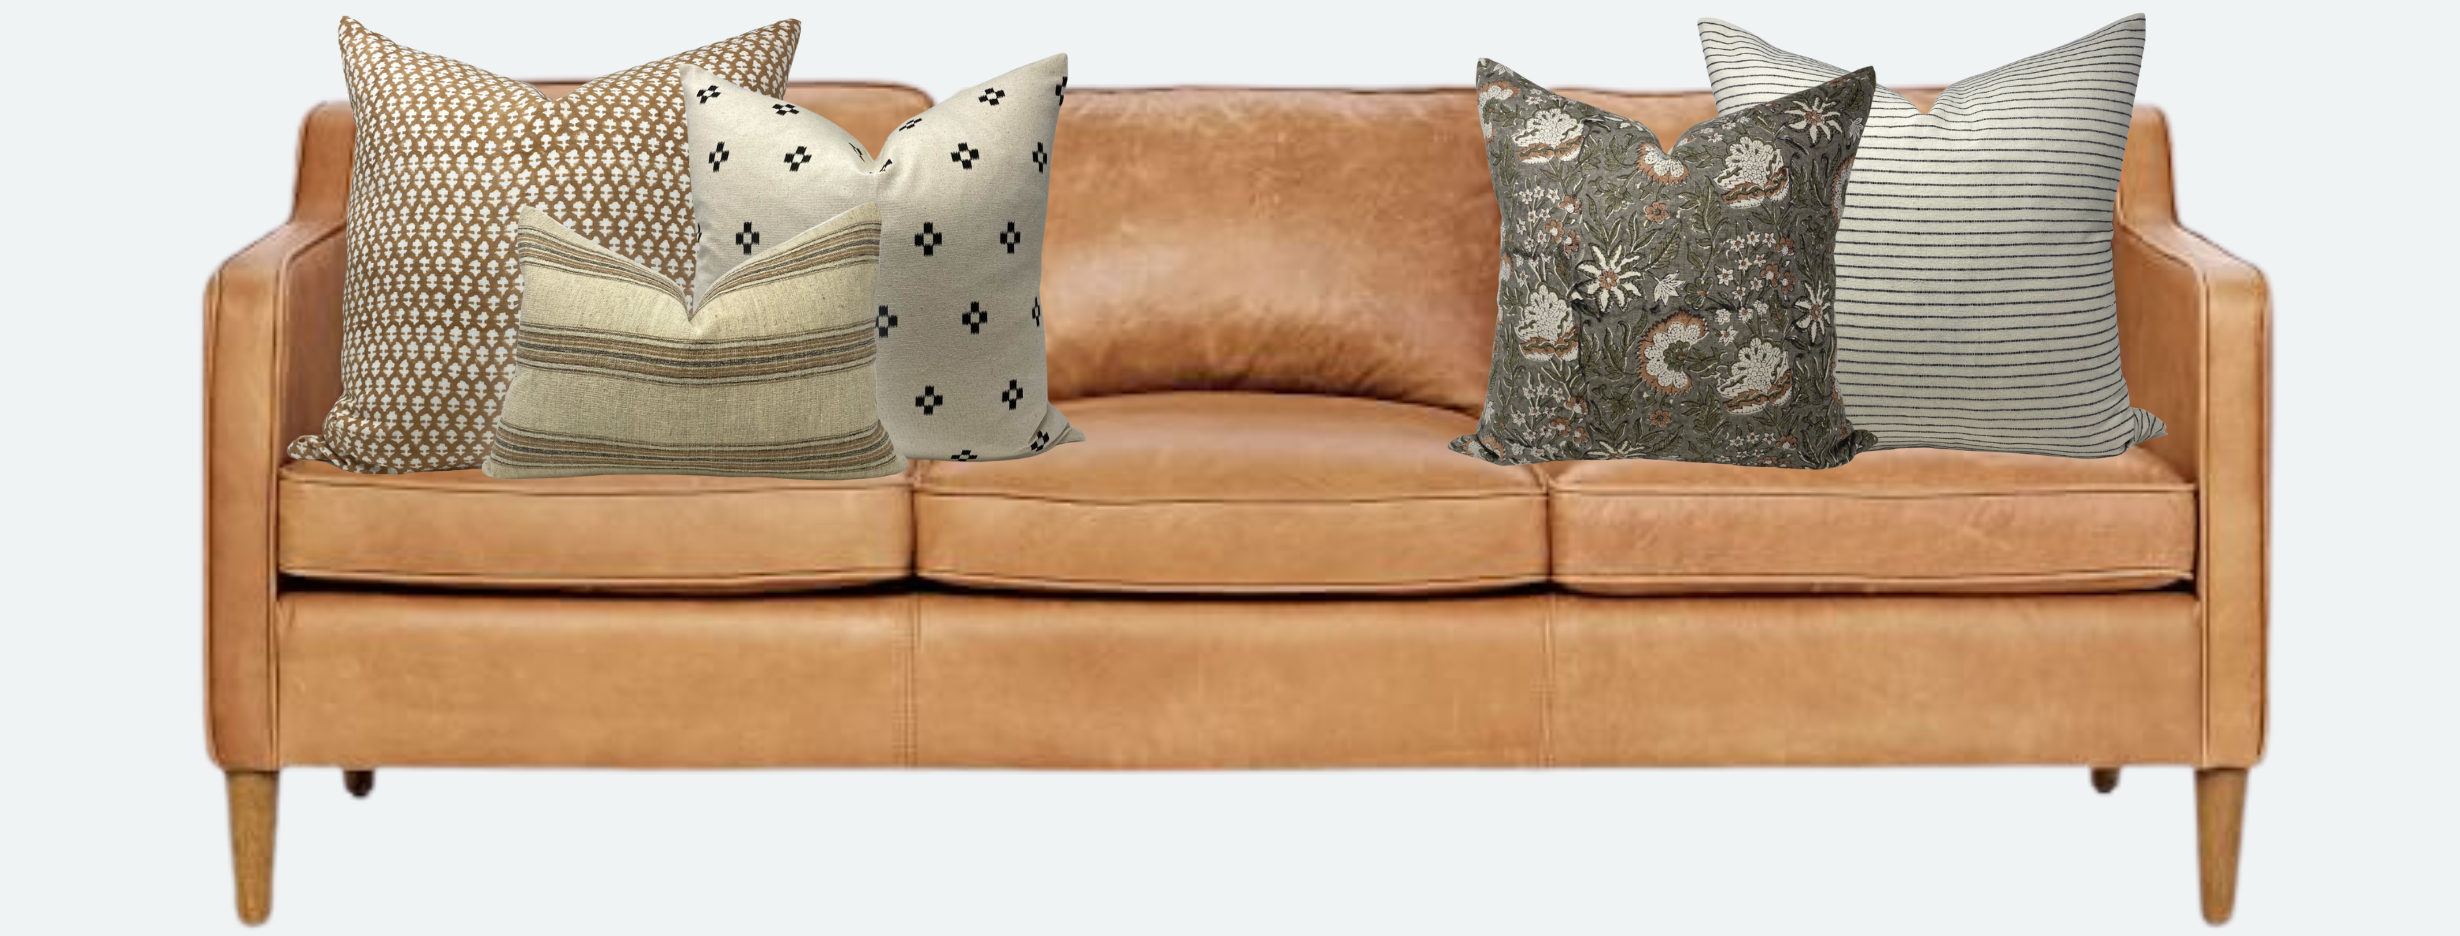 A Guide to Accent Pillows for Chairs – EVERAND